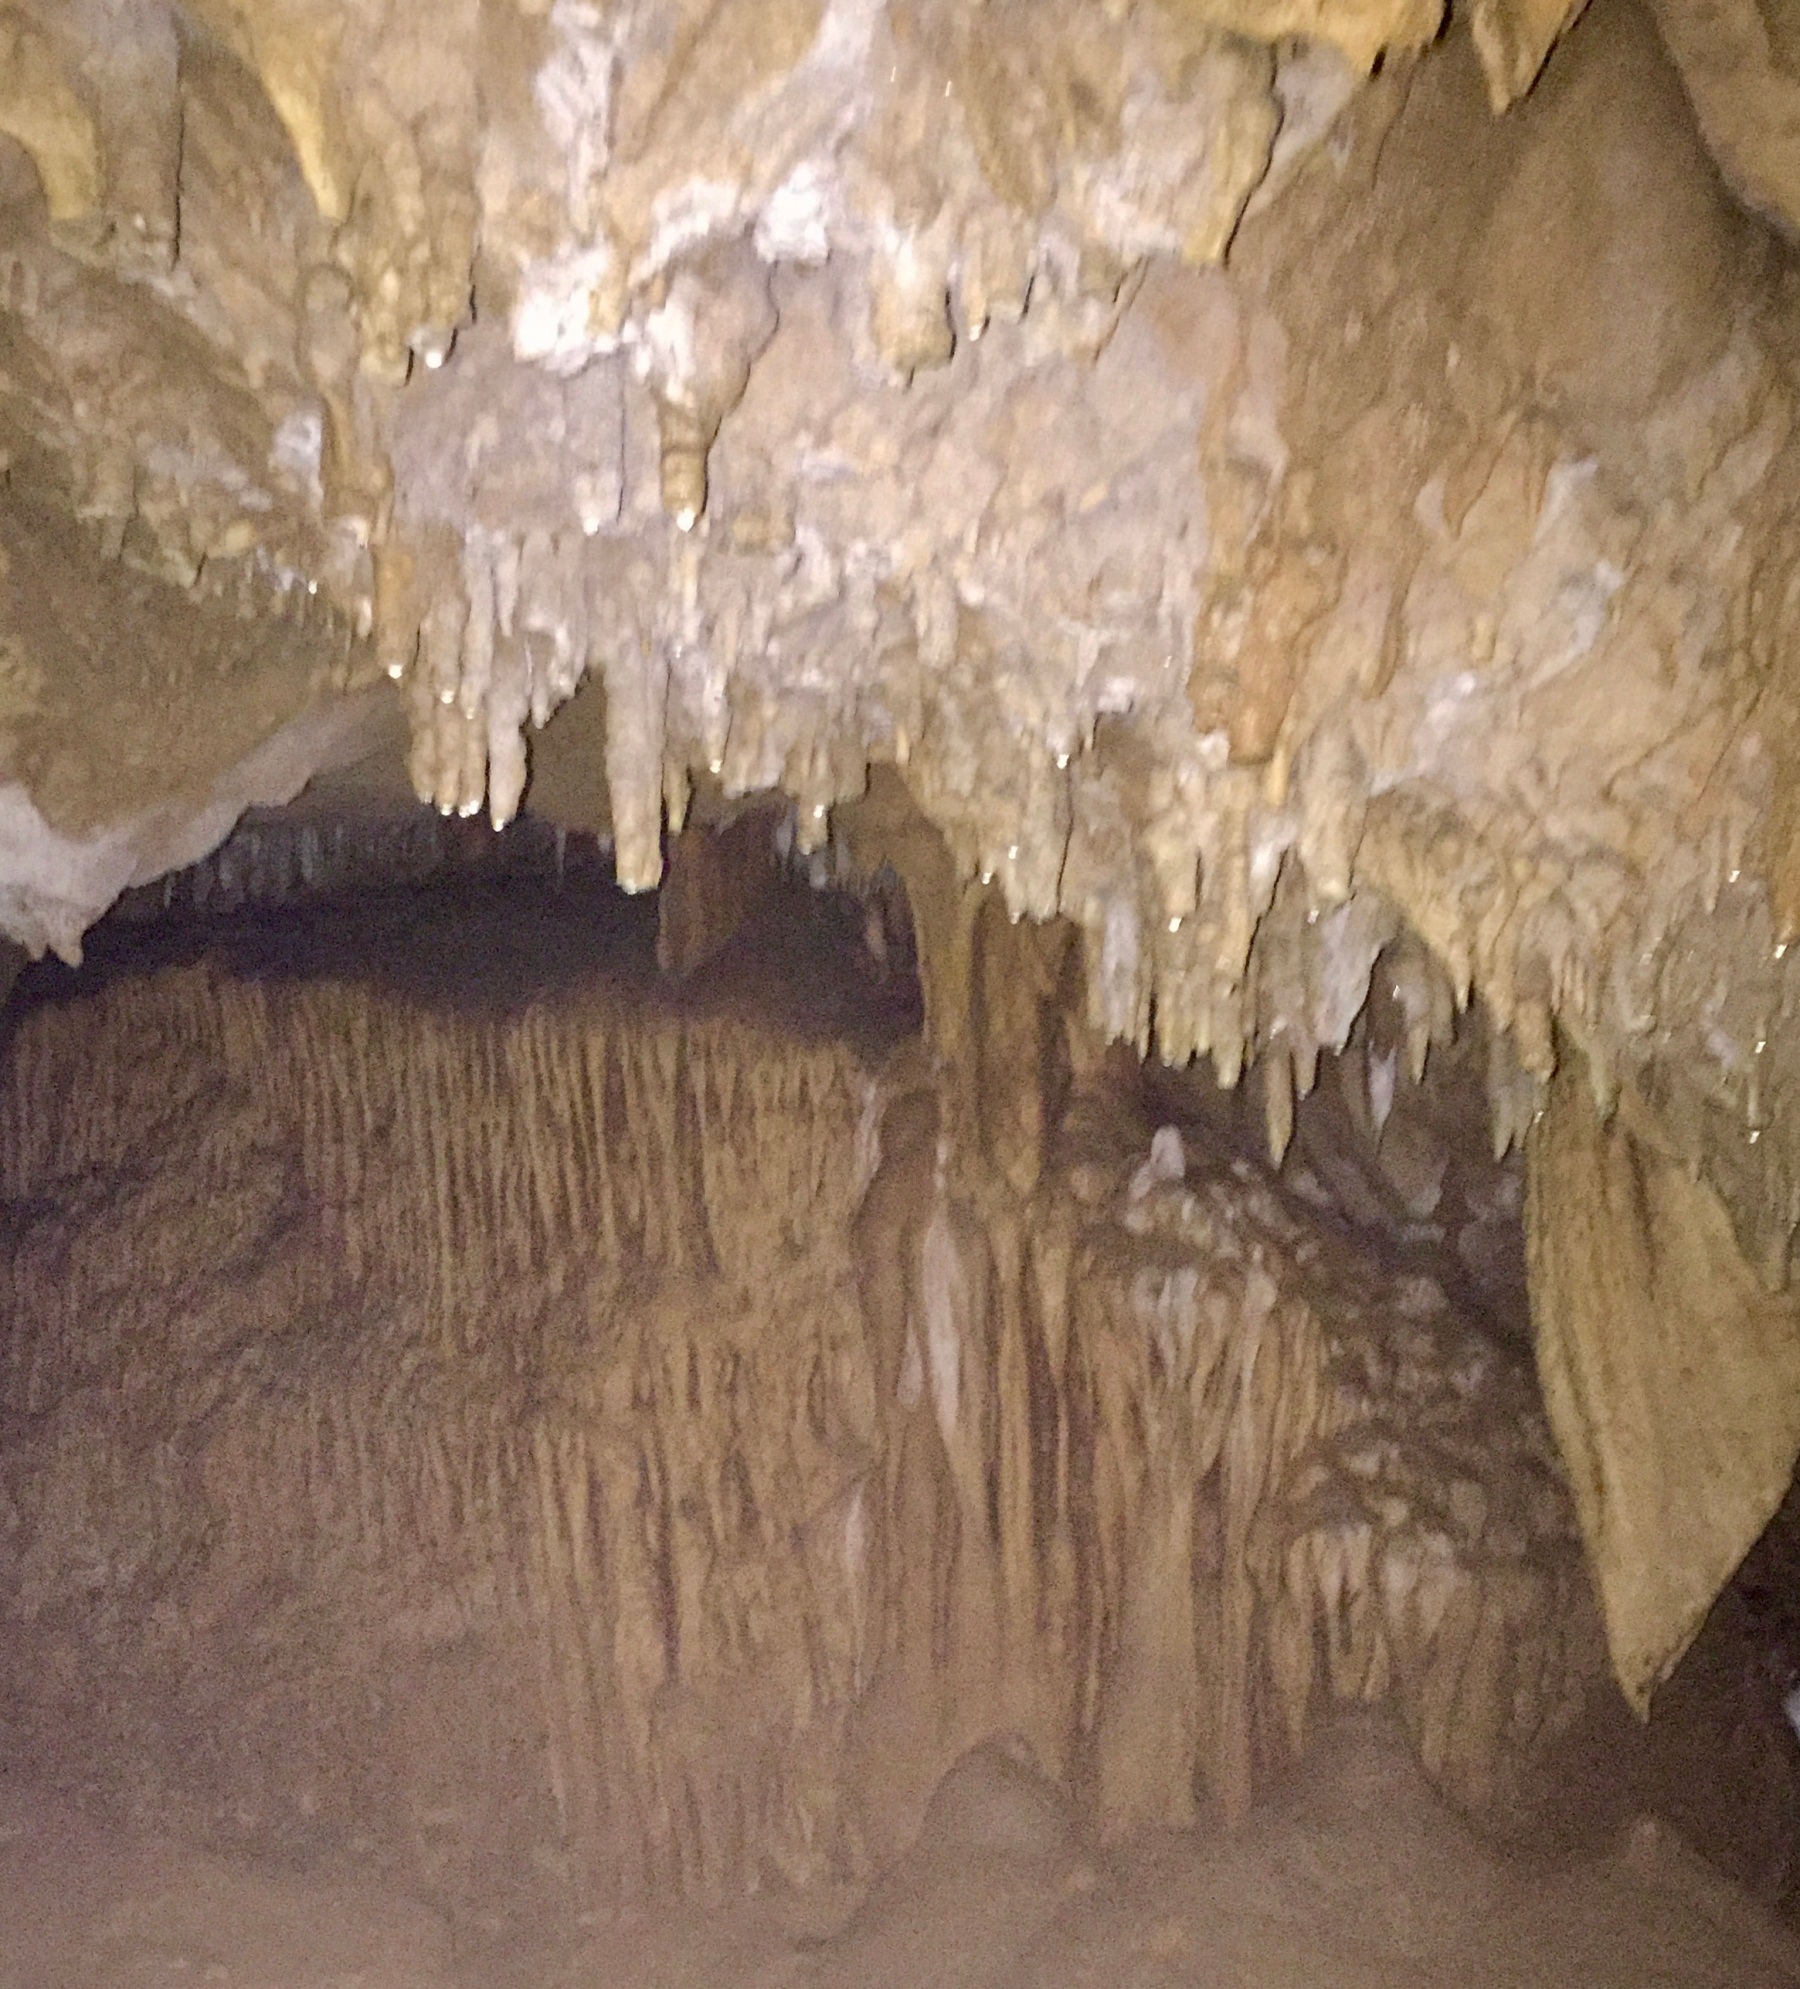 Caverns in Florida rock formations